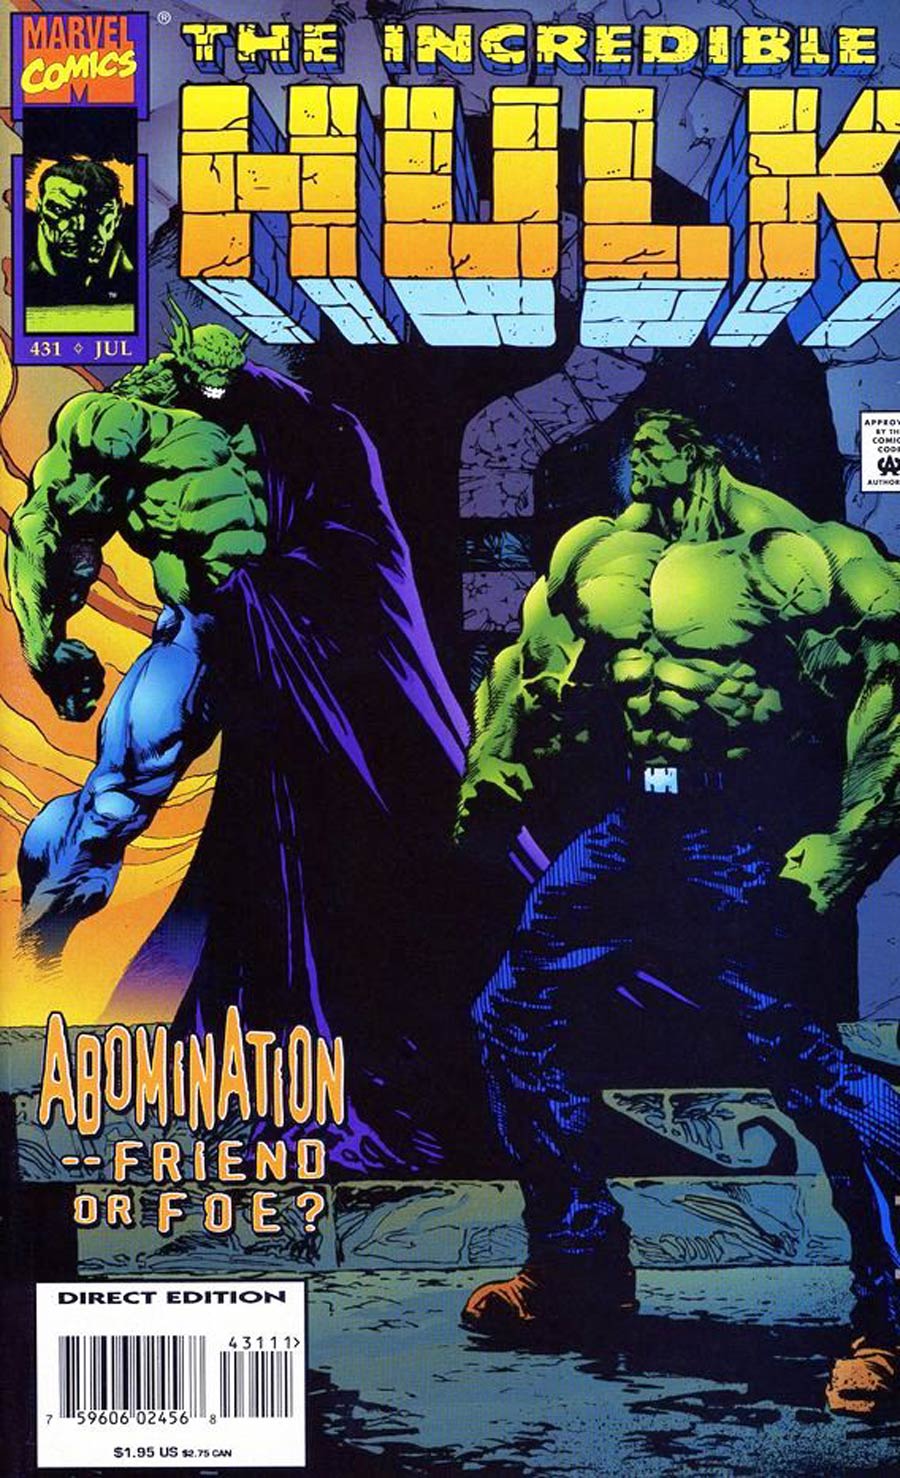 Incredible Hulk #431 Cover A Direct Edition